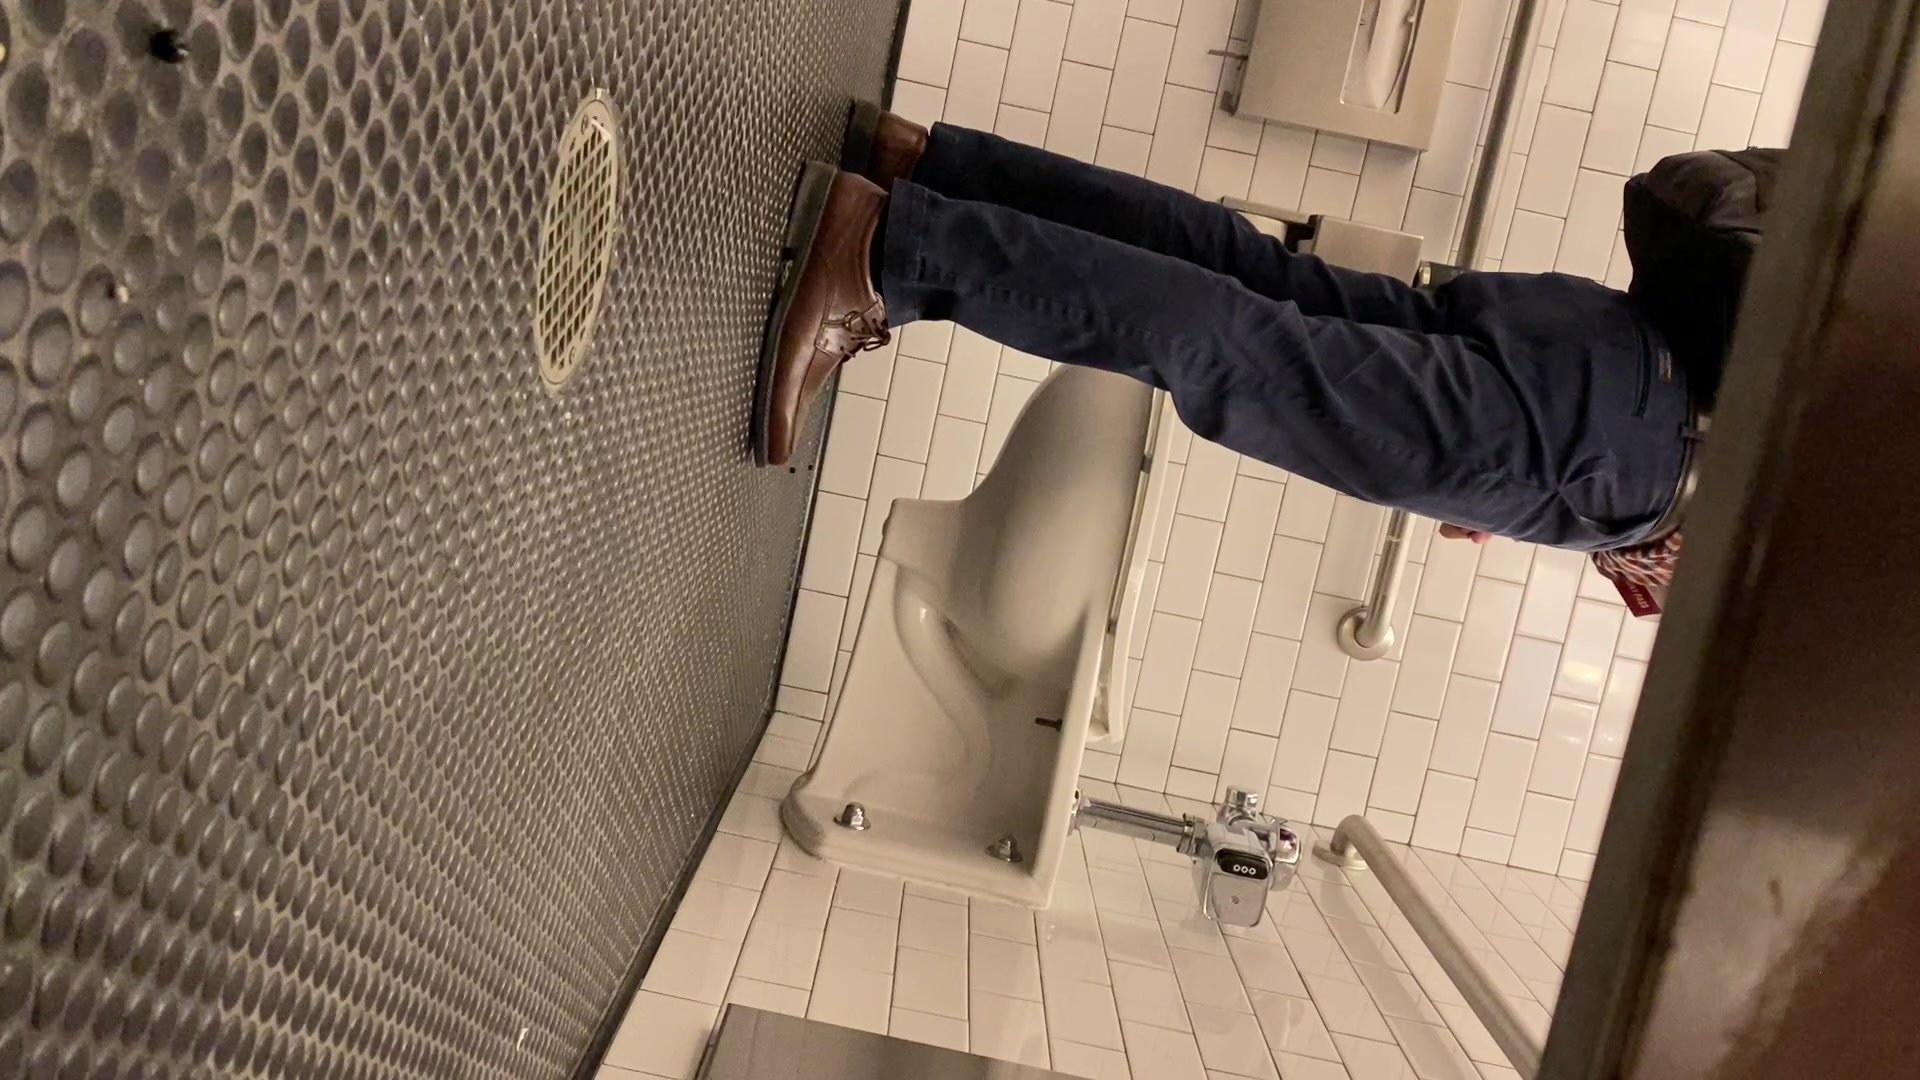 Dude pissing at a conference